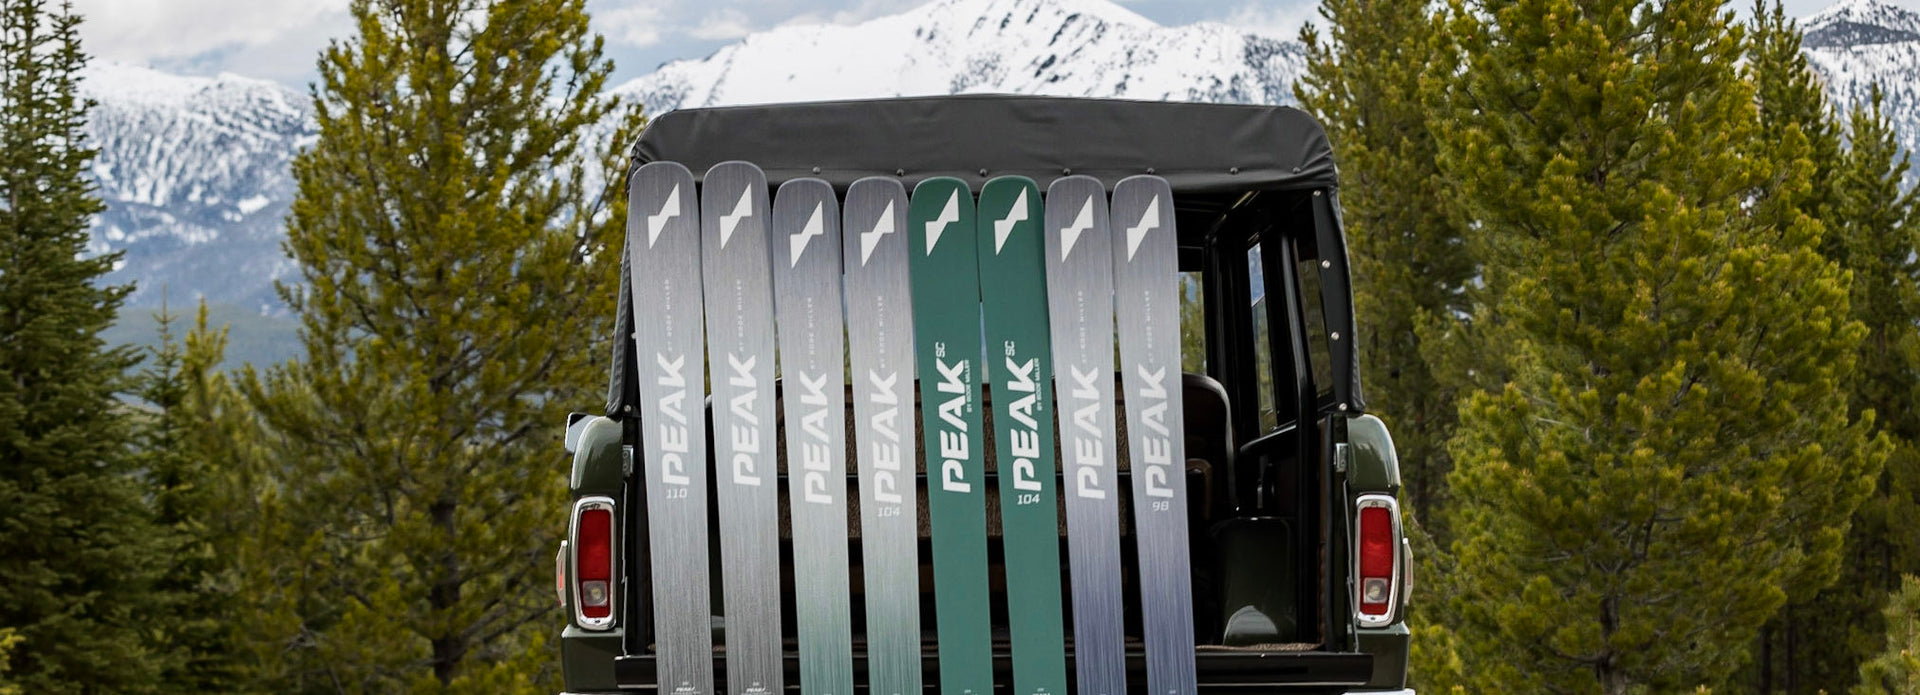 Peak Skis lined up leaning on a truck